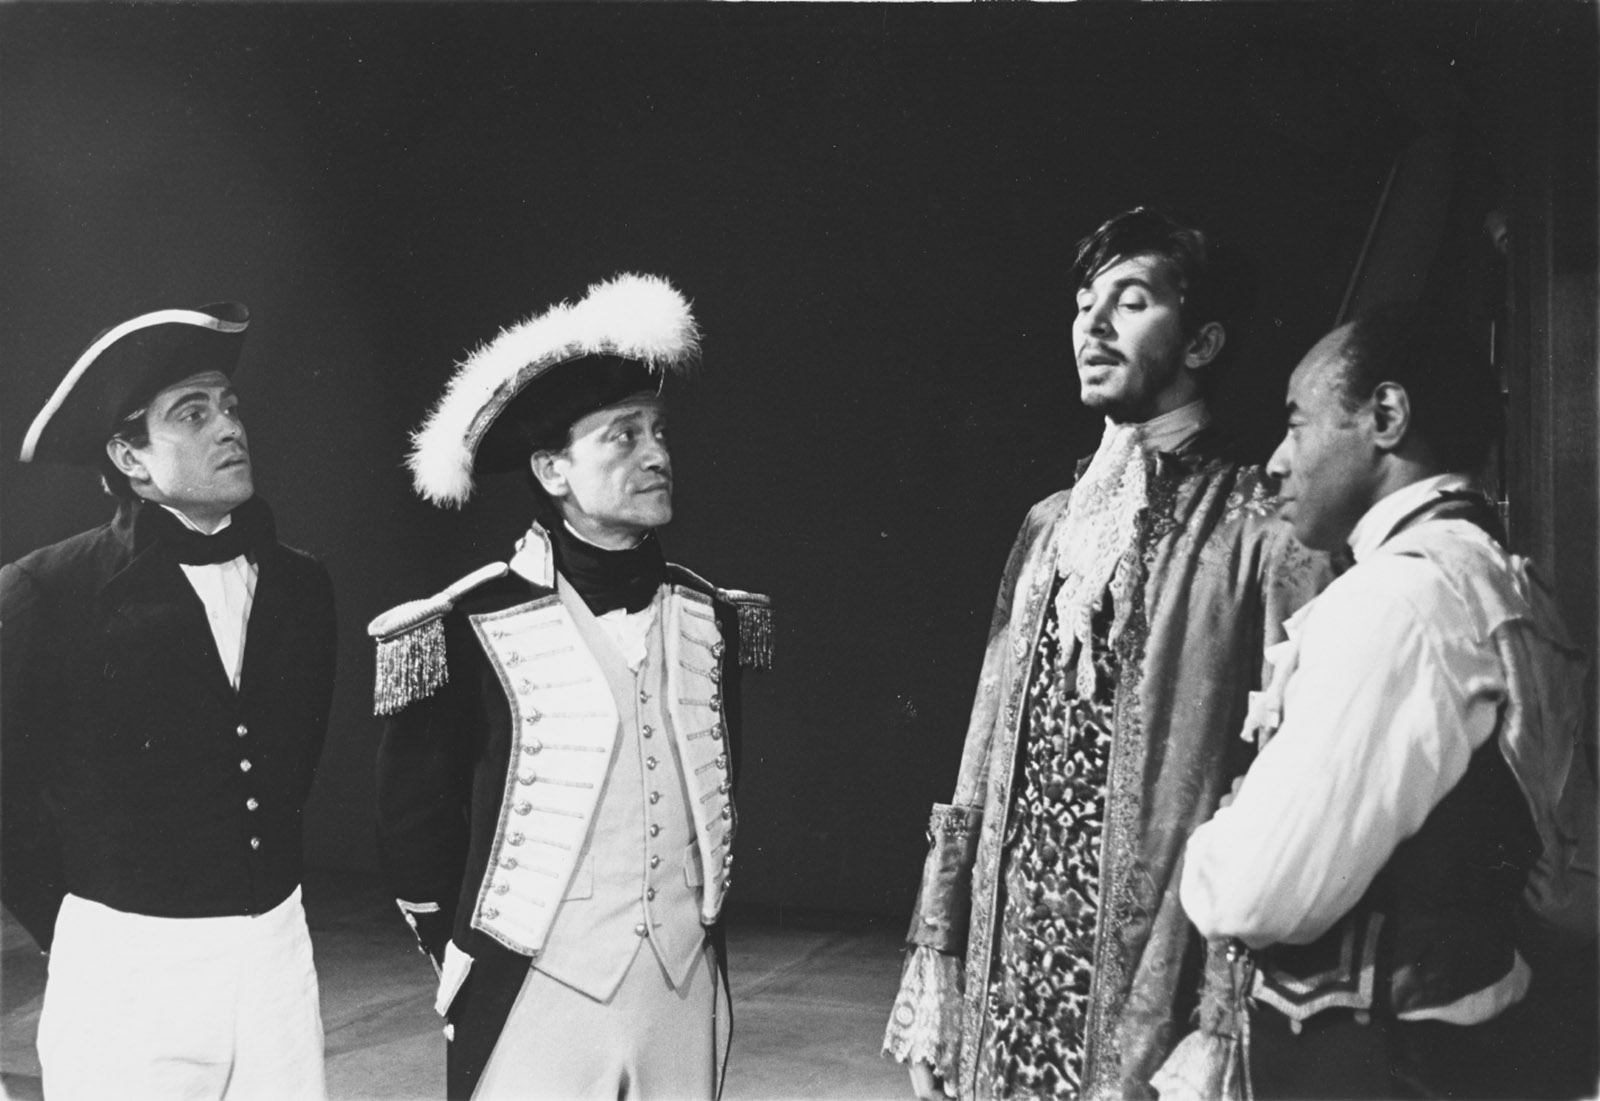 A scene from the first production of Robert Lowell’s Benito Cereno, part of his trilogy, The Old Glory, directed by Jonathan Miller at the American Place Theater in 1964 and based on Herman Melville’s novella. Captain Amasa Delano (Lester Rawlins, second from left), who has boarded the slave ship San Dominick off the coast of Trinidad, is listening to its captain, Don Benito Cereno (Frank Langella), and is still unaware that the slaves, under the command of Cereno’s servant, Babu (Roscoe Lee Browne, right), have taken over the ship.